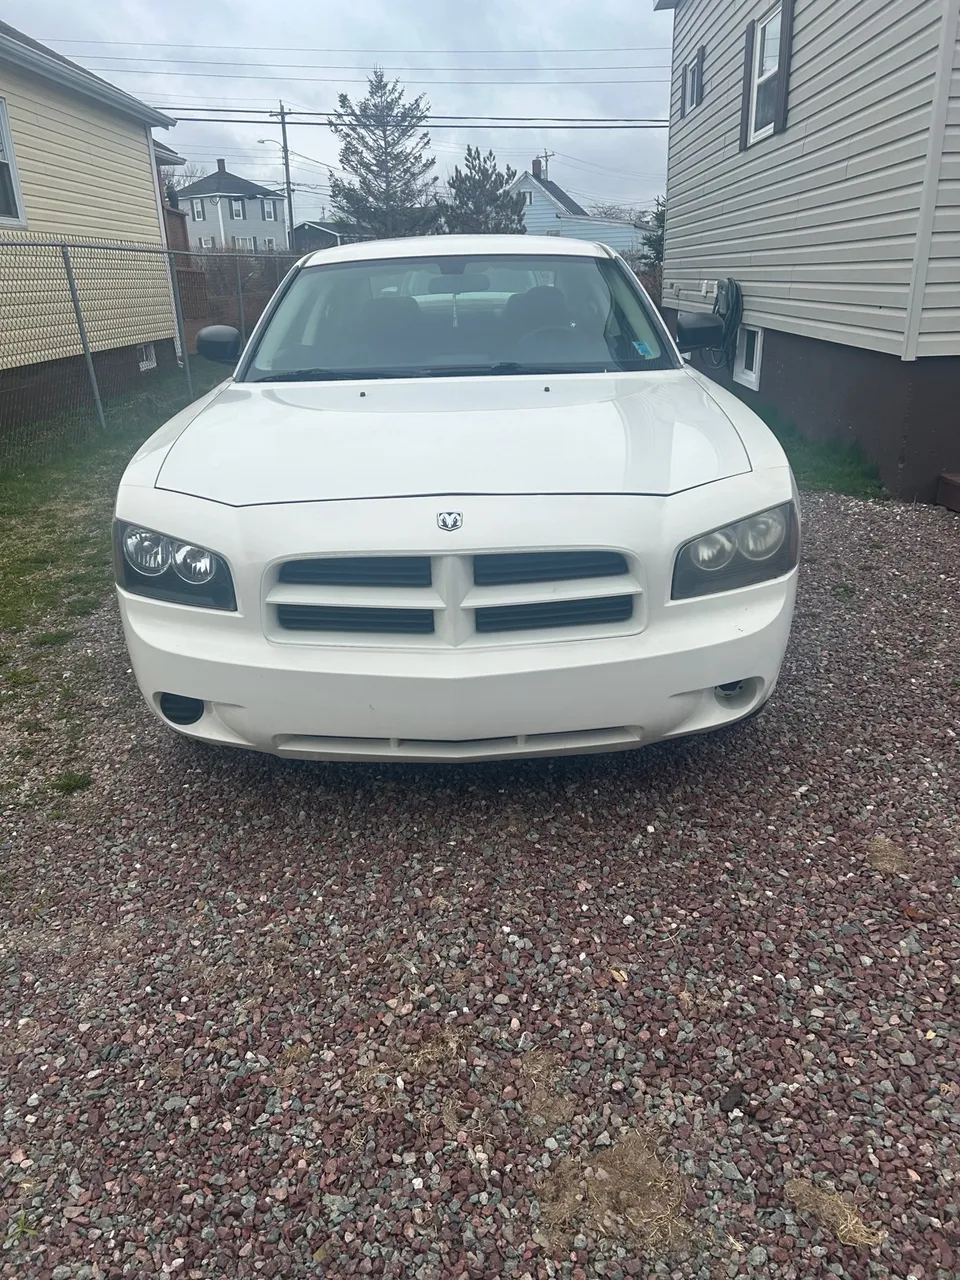 Dodge charger for sale